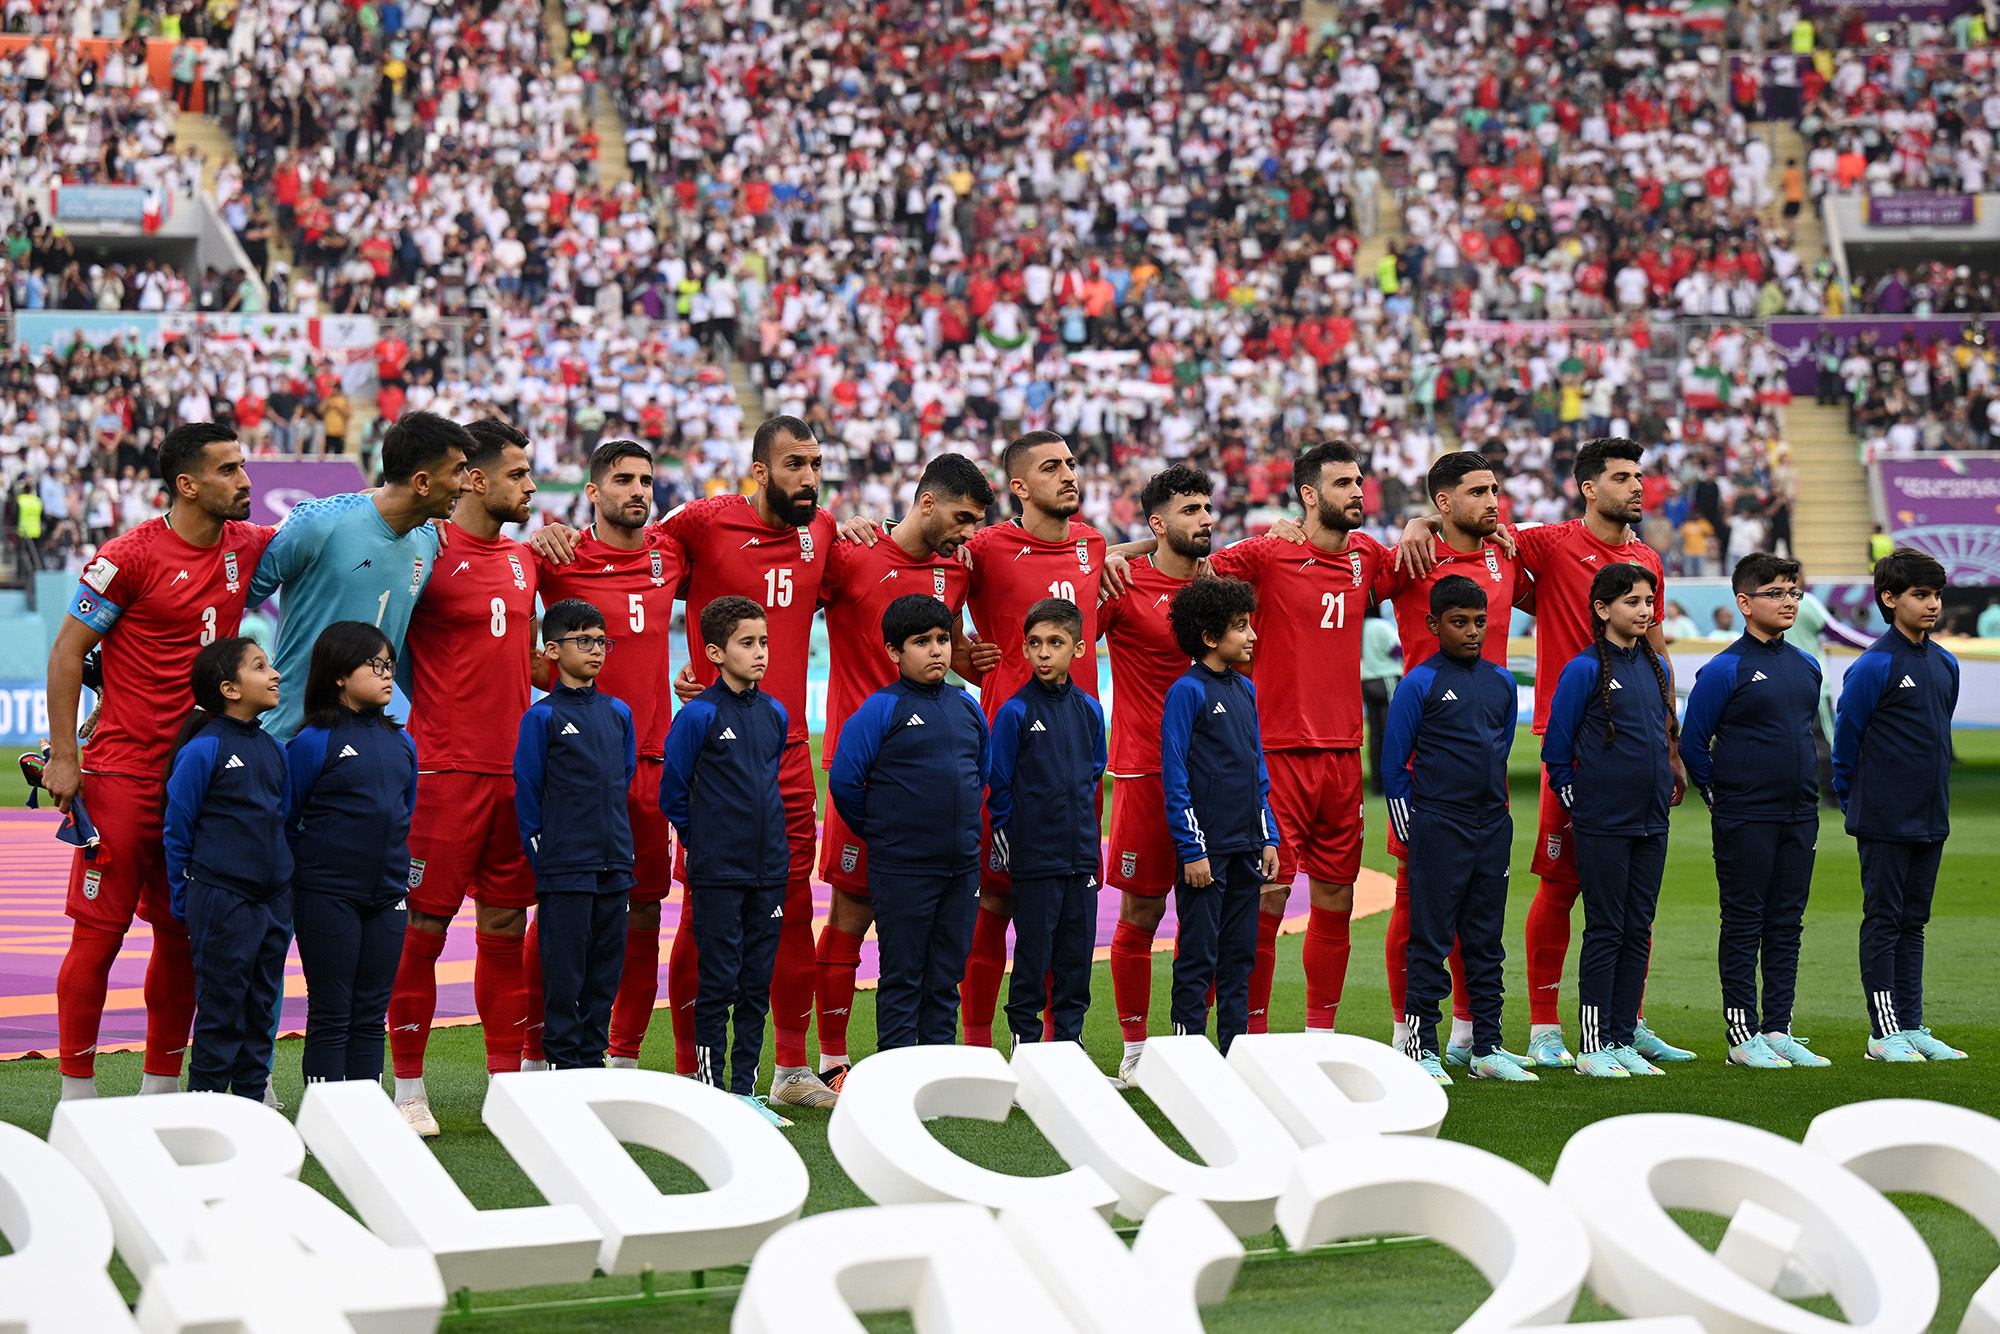 Iranian players line up for the national anthem prior to the FIFA World Cup Qatar 2022 Group B match between England and IR Iran at Khalifa International Stadium on November 21, in Doha, Qatar.